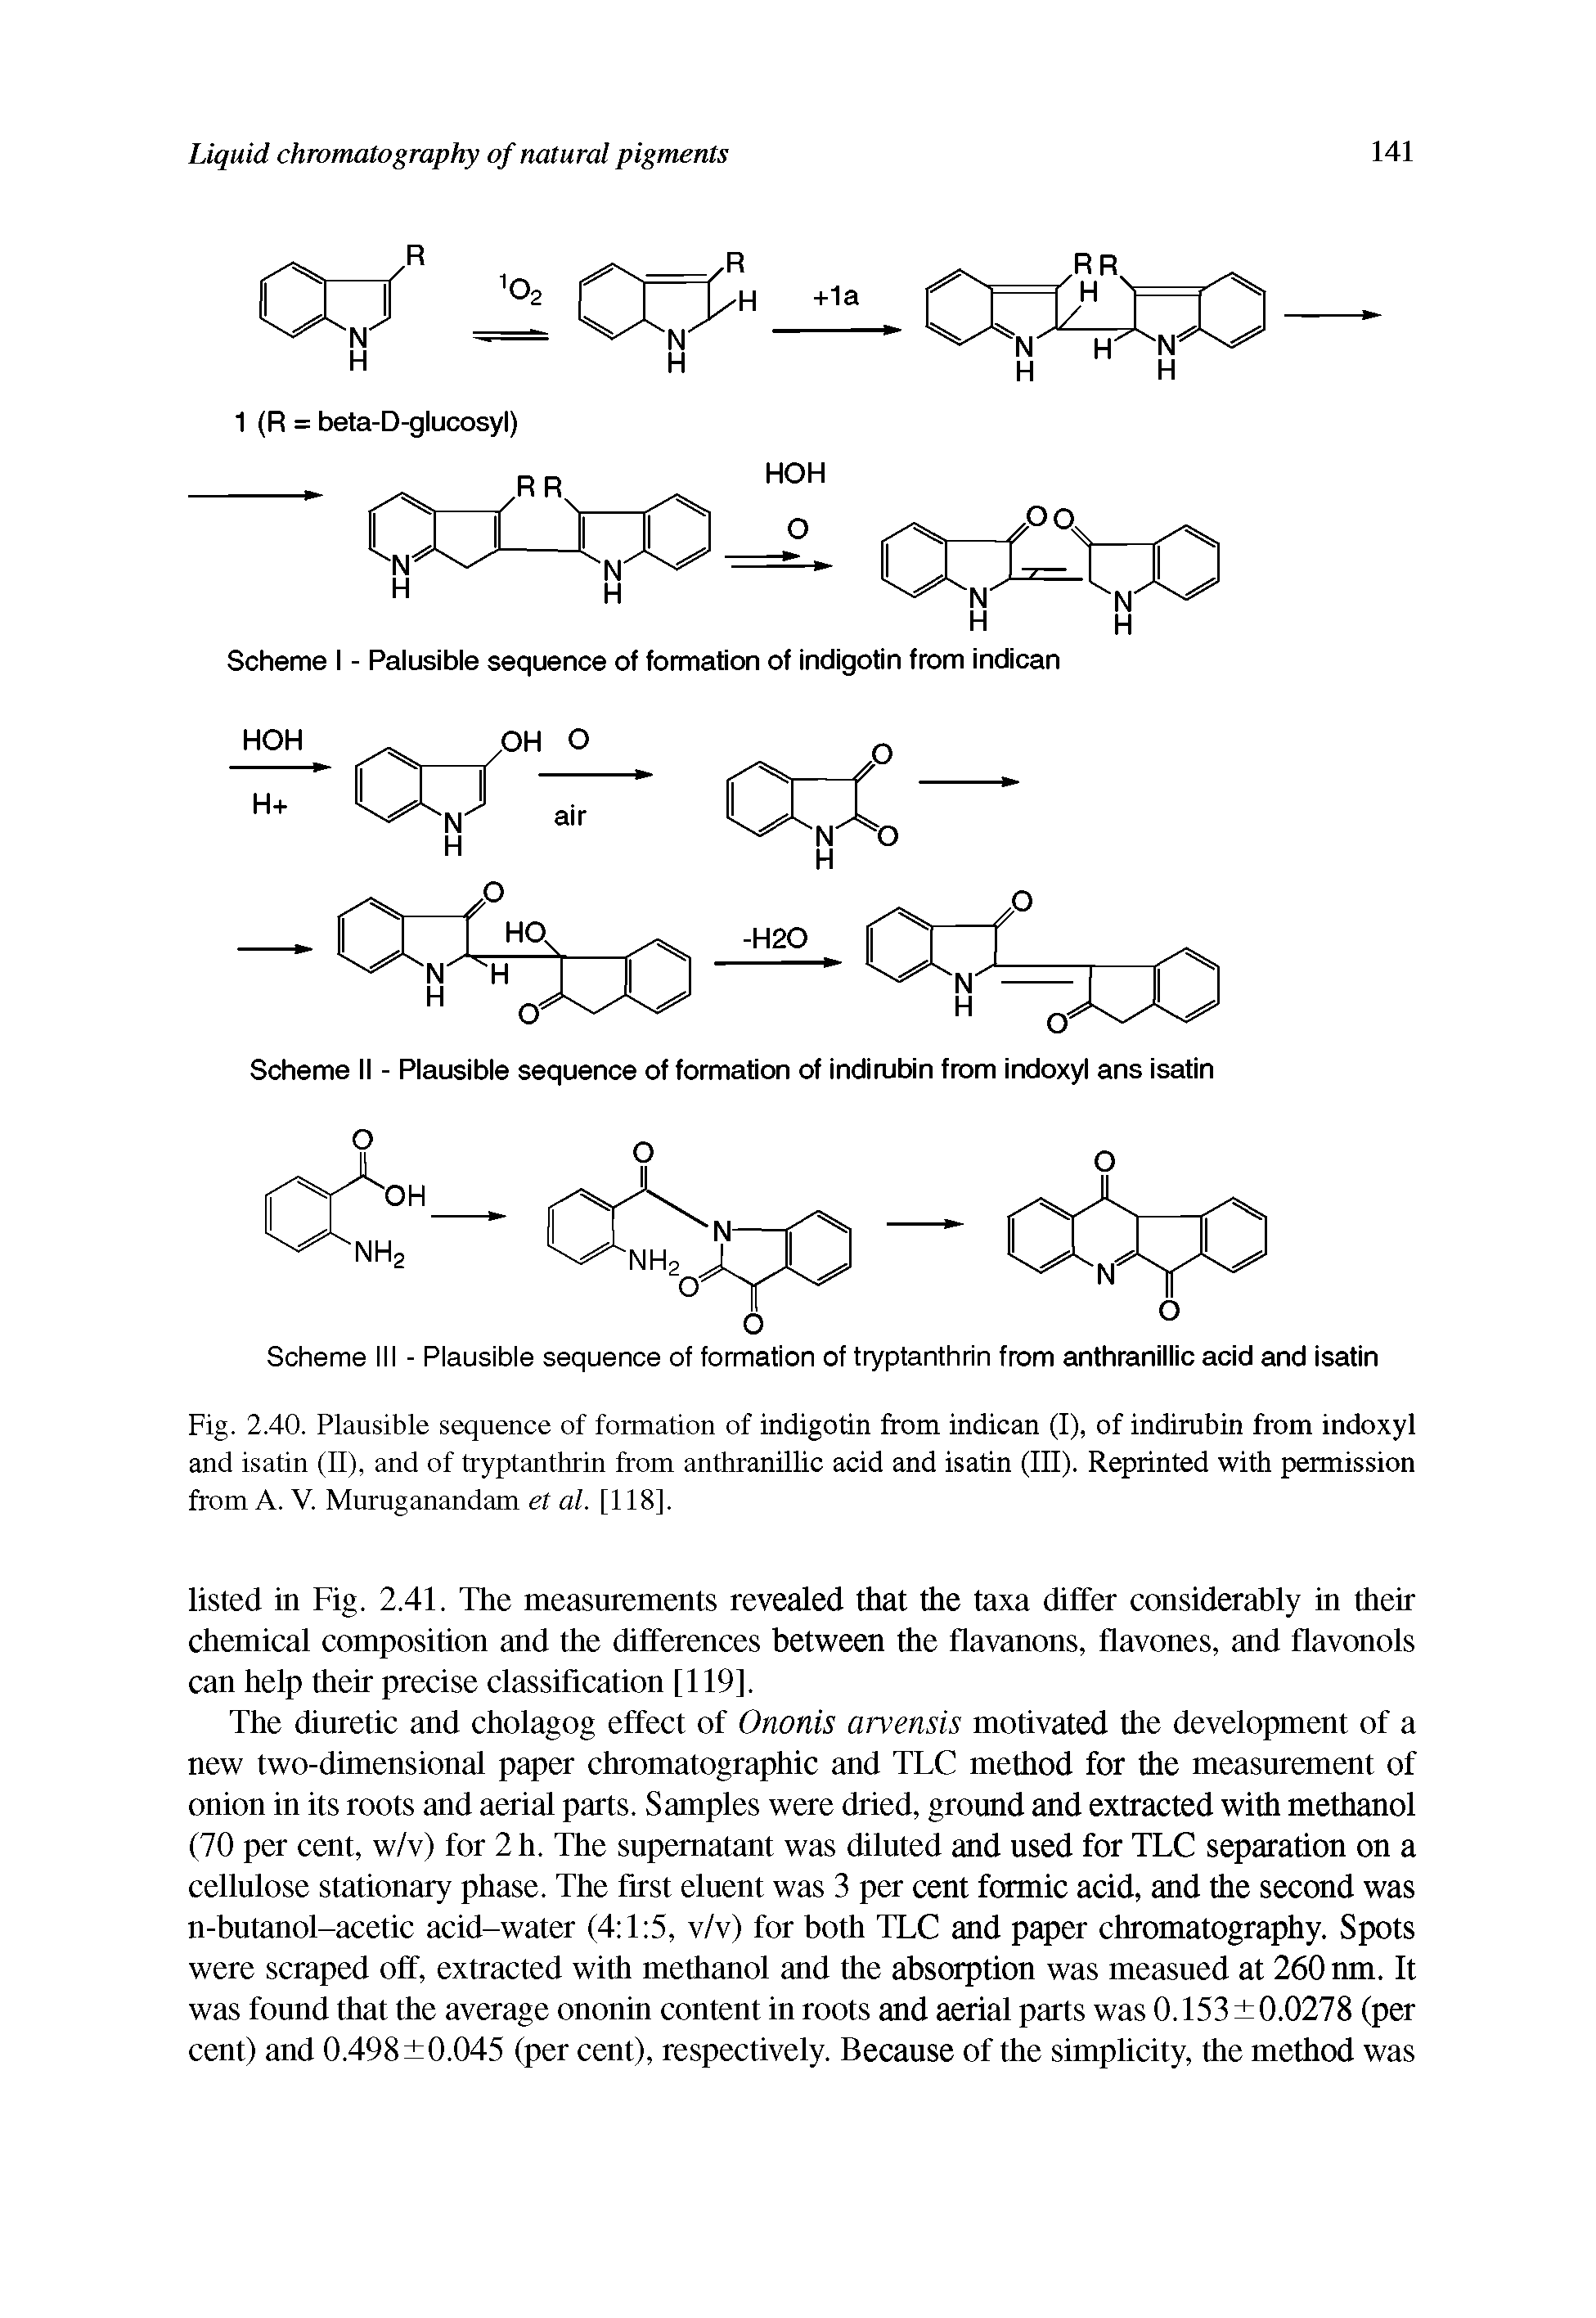 Fig. 2.40. Plausible sequence of formation of indigotin from indican (I), of indirubin from indoxyl and isatin (II), and of tryptanthrin from anthranillic acid and isatin (III). Reprinted with permission from A. V. Muruganandam et al. [118].